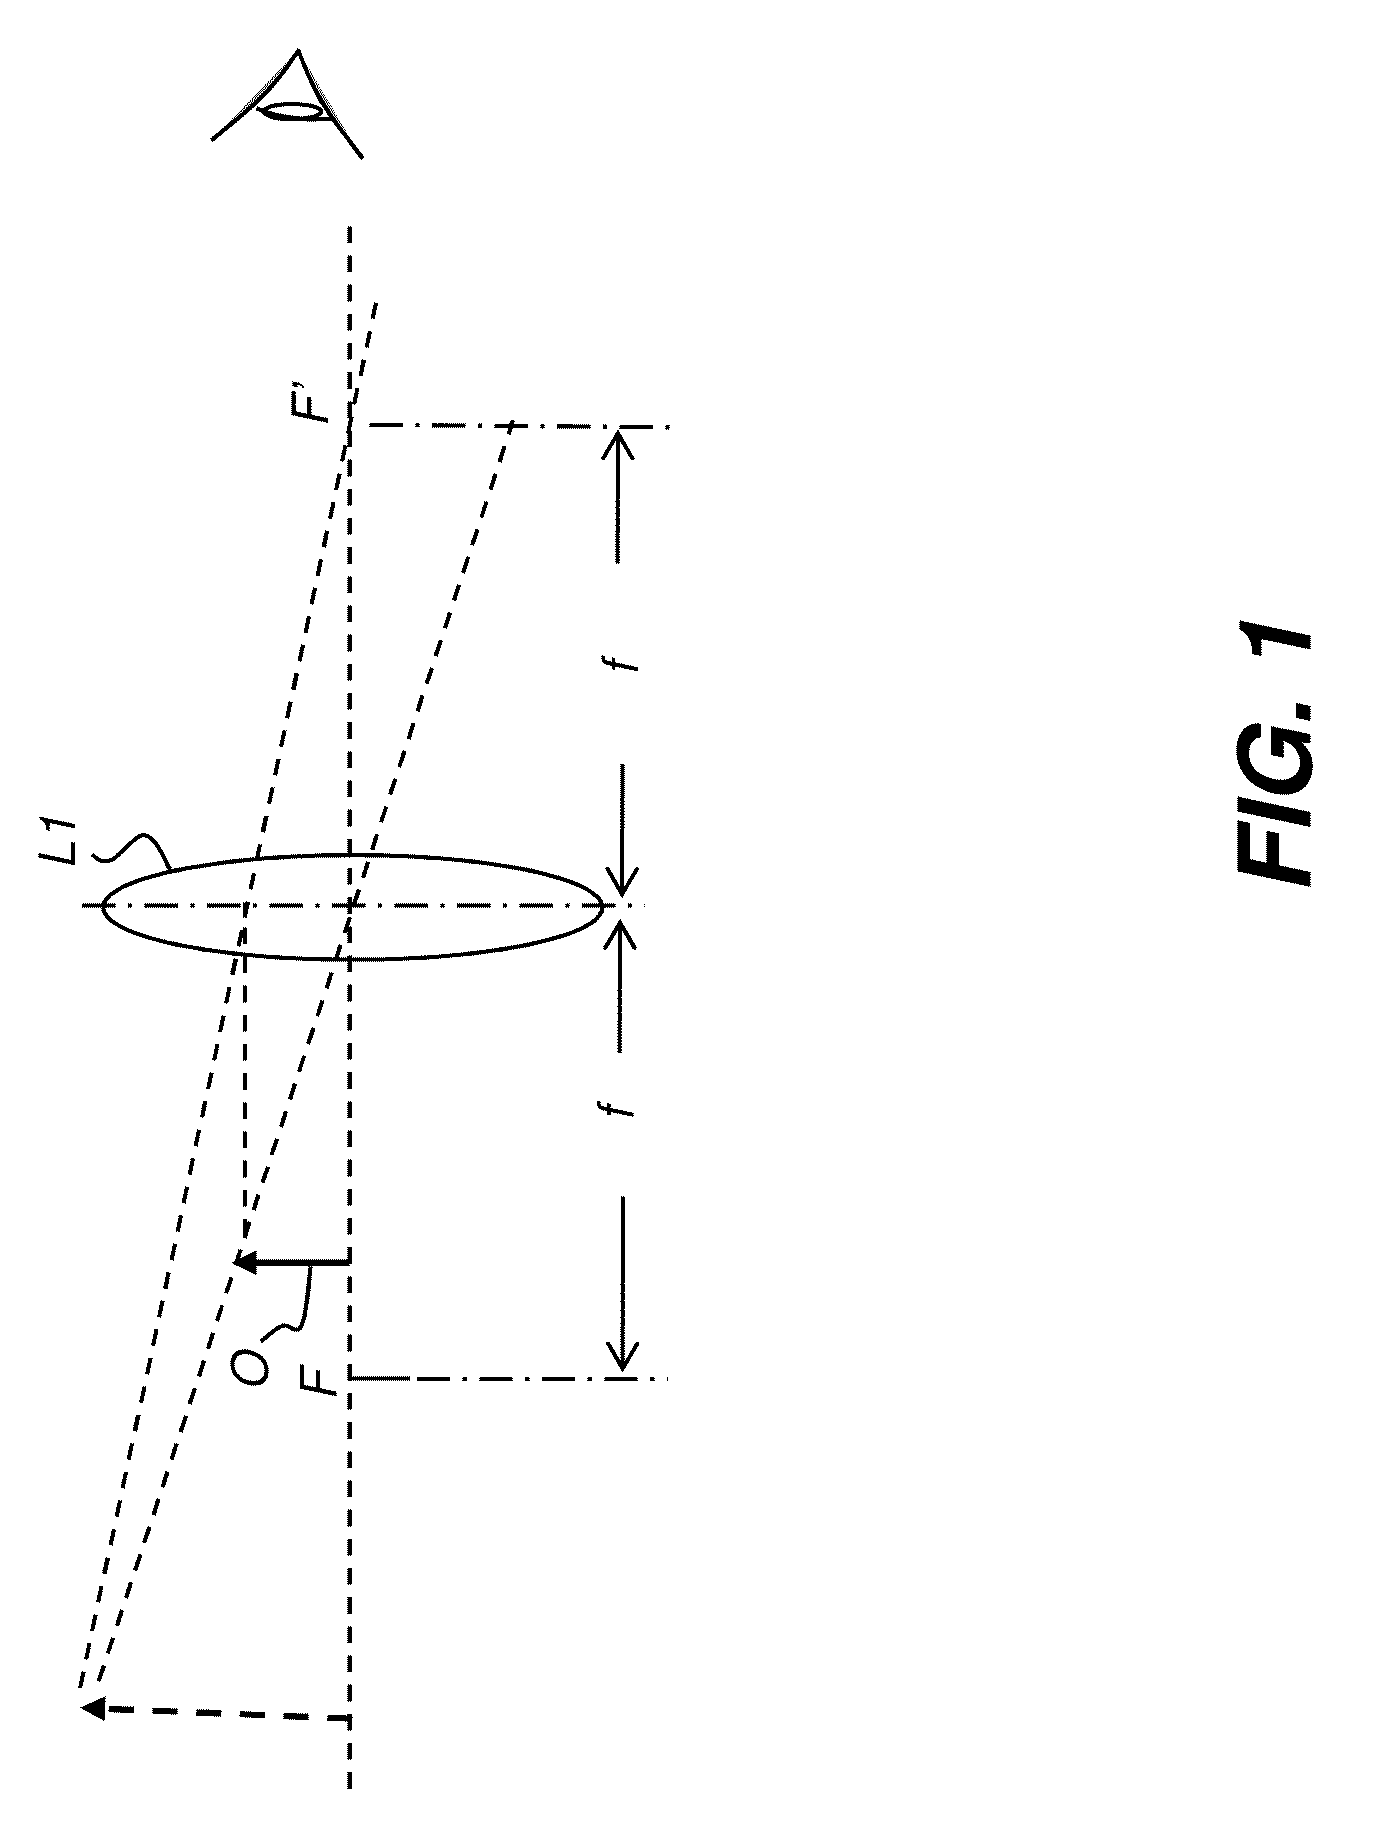 Head-mounted optical apparatus using an OLED display